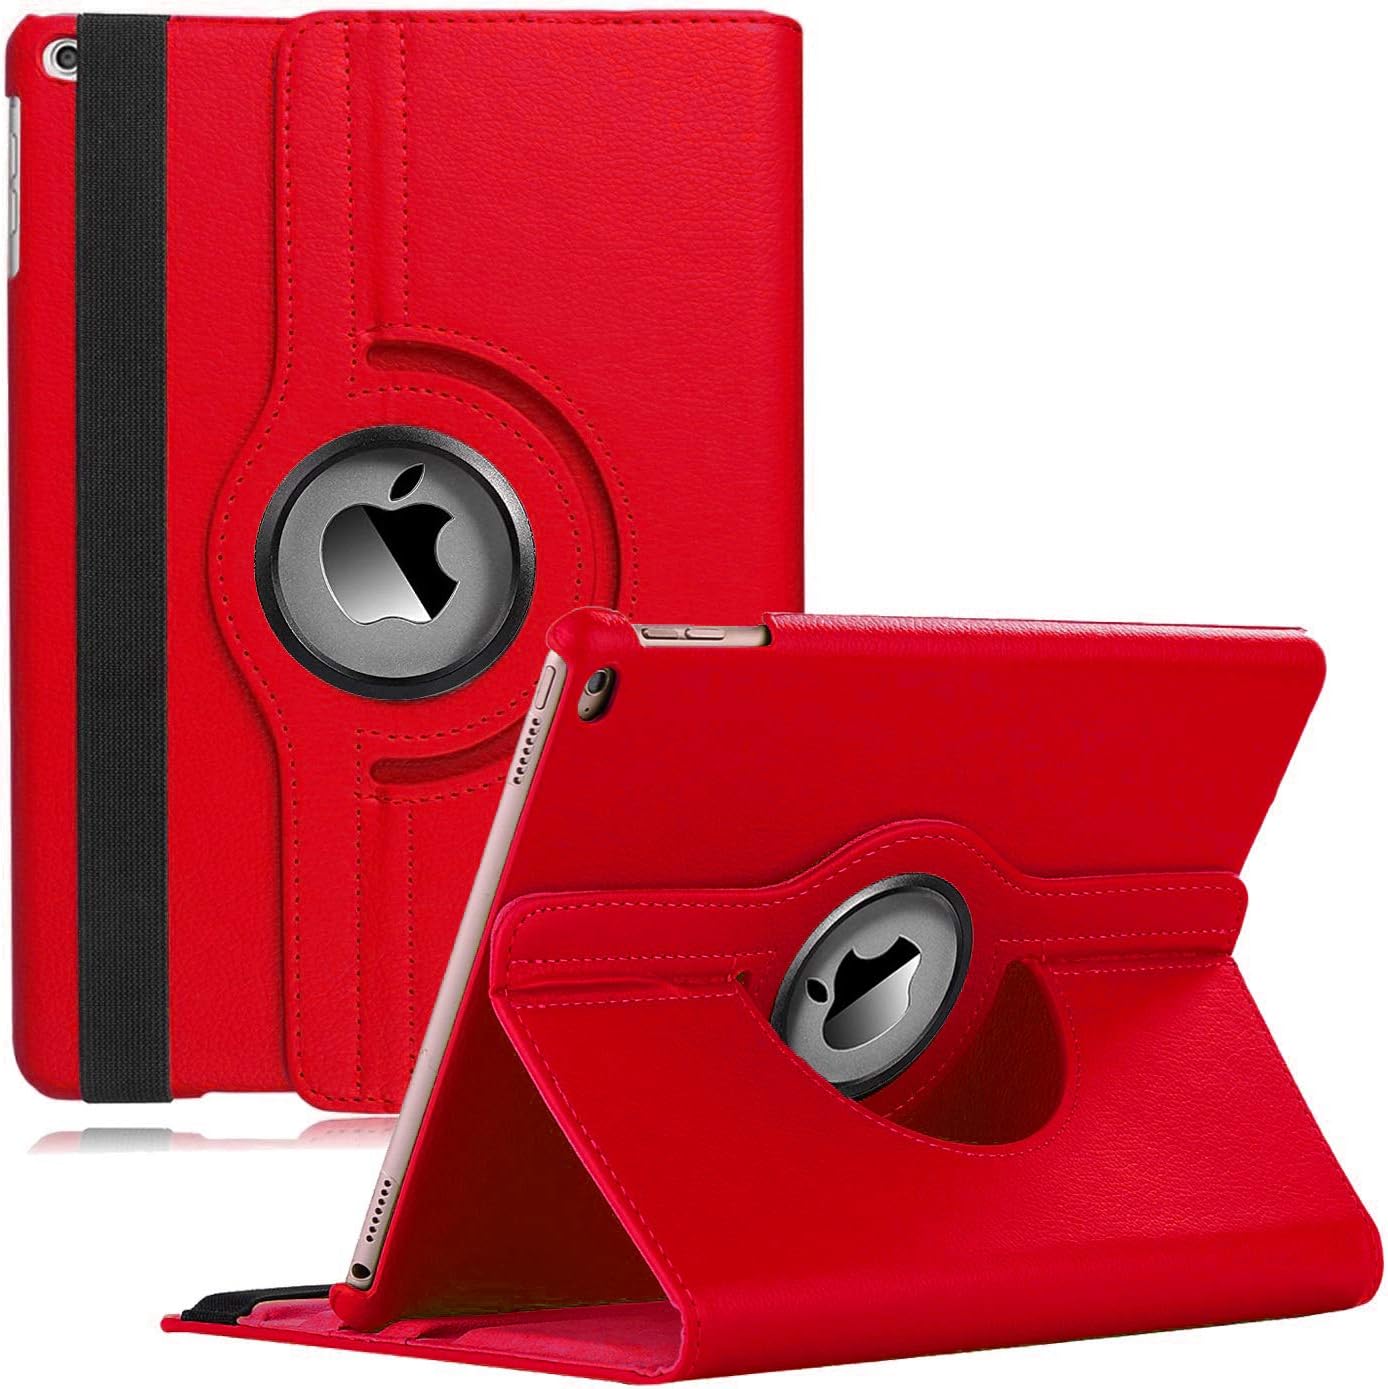 Kickstand Book Case for iPad 4/3/2 - Red *Free Shipping*